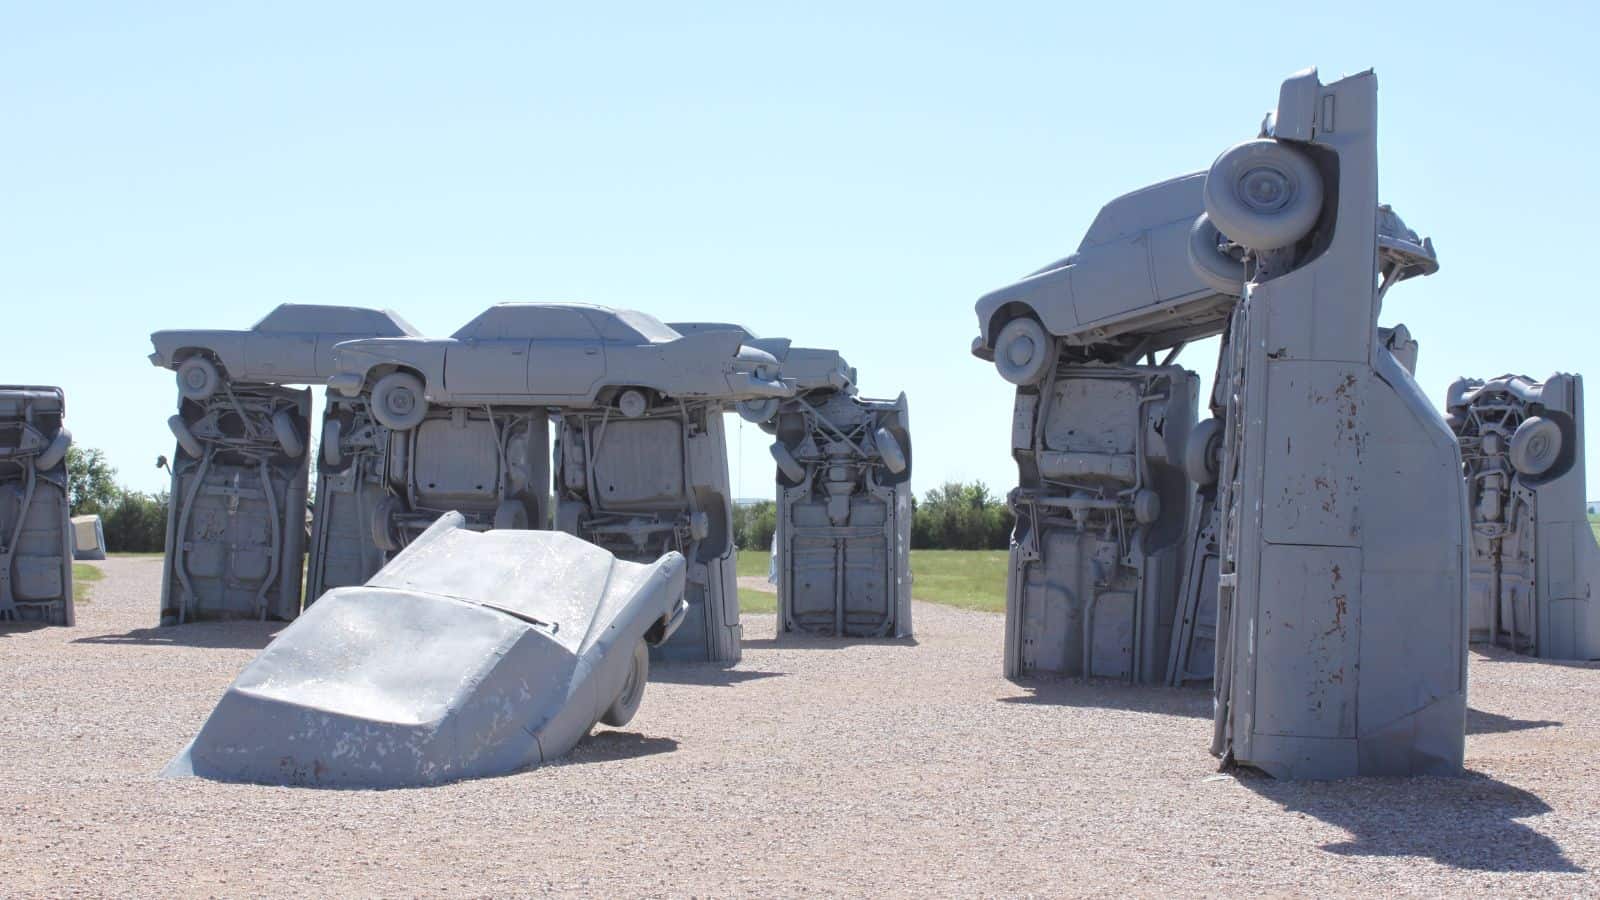 <p>Stonehenge is legendary; Carhenge, on the other hand, falls a bit short.Though classic cars are generally loved, stacking them to imitate an ancient landmark doesn’t capture everyone’s interest.</p>